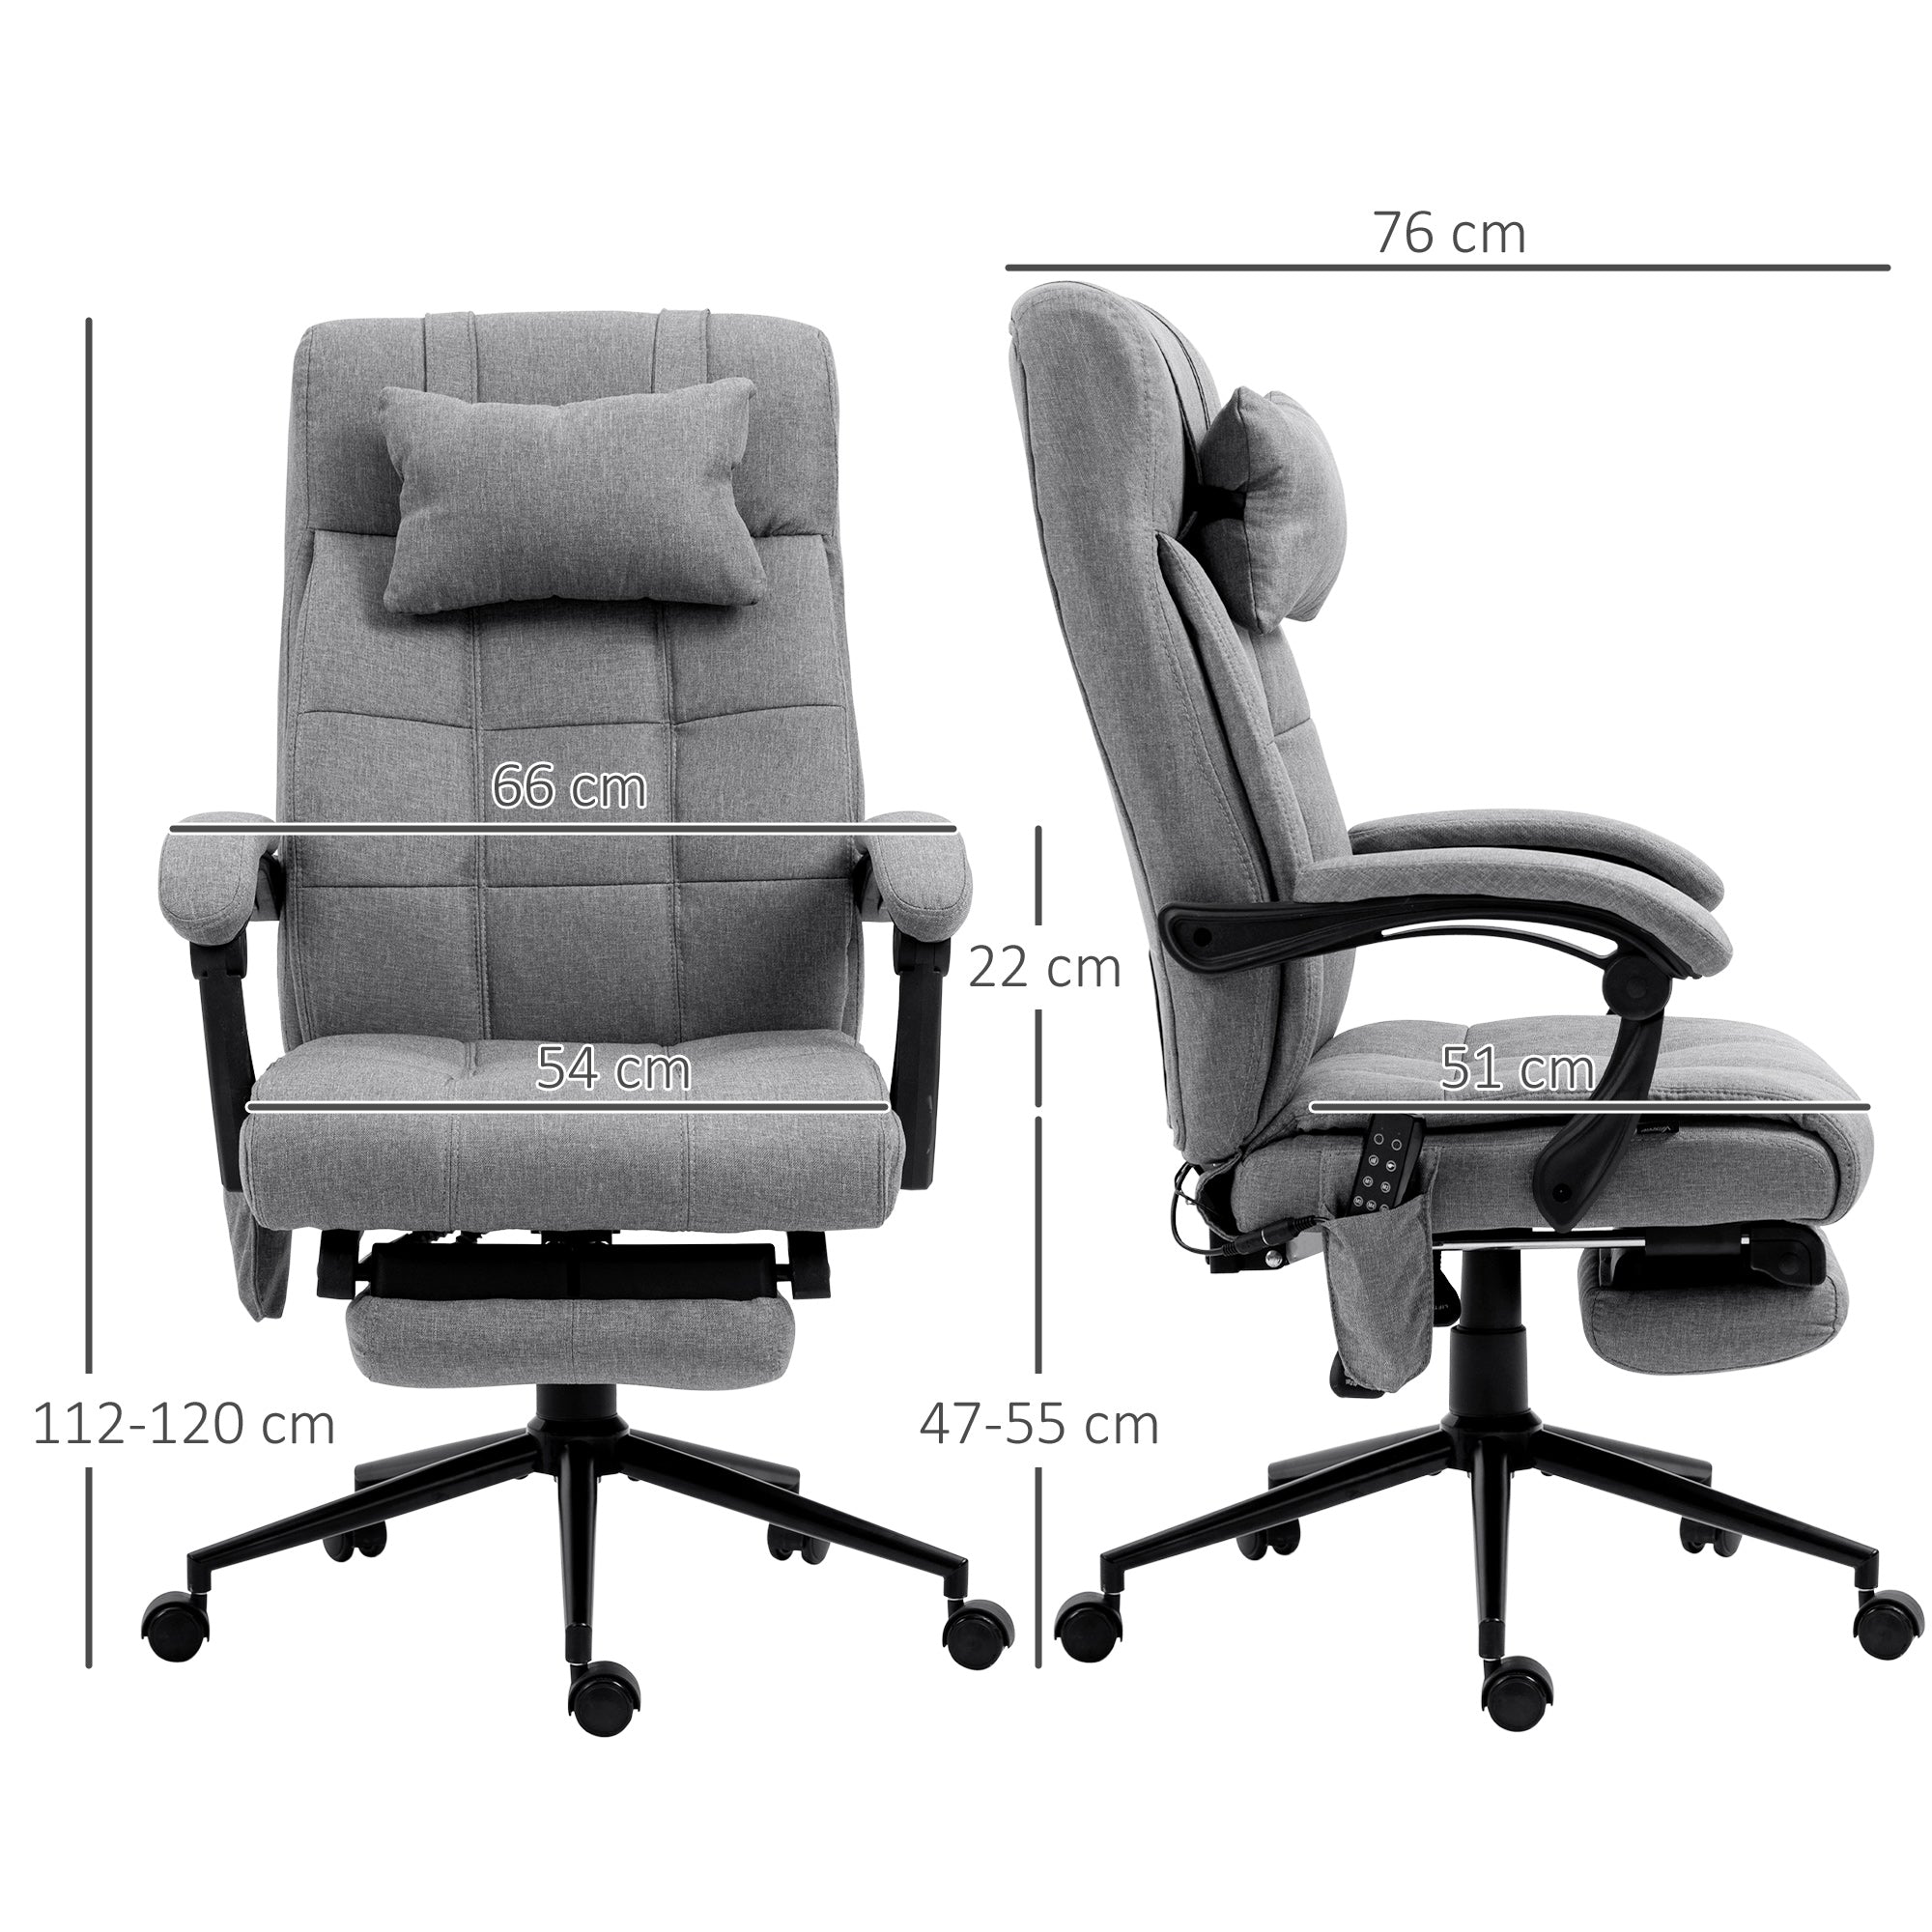 Vibration Massage Office Chair with Heat, Fabric Computer Chair with Head Pillow, Footrest, Armrest, Reclining Back, Grey-2